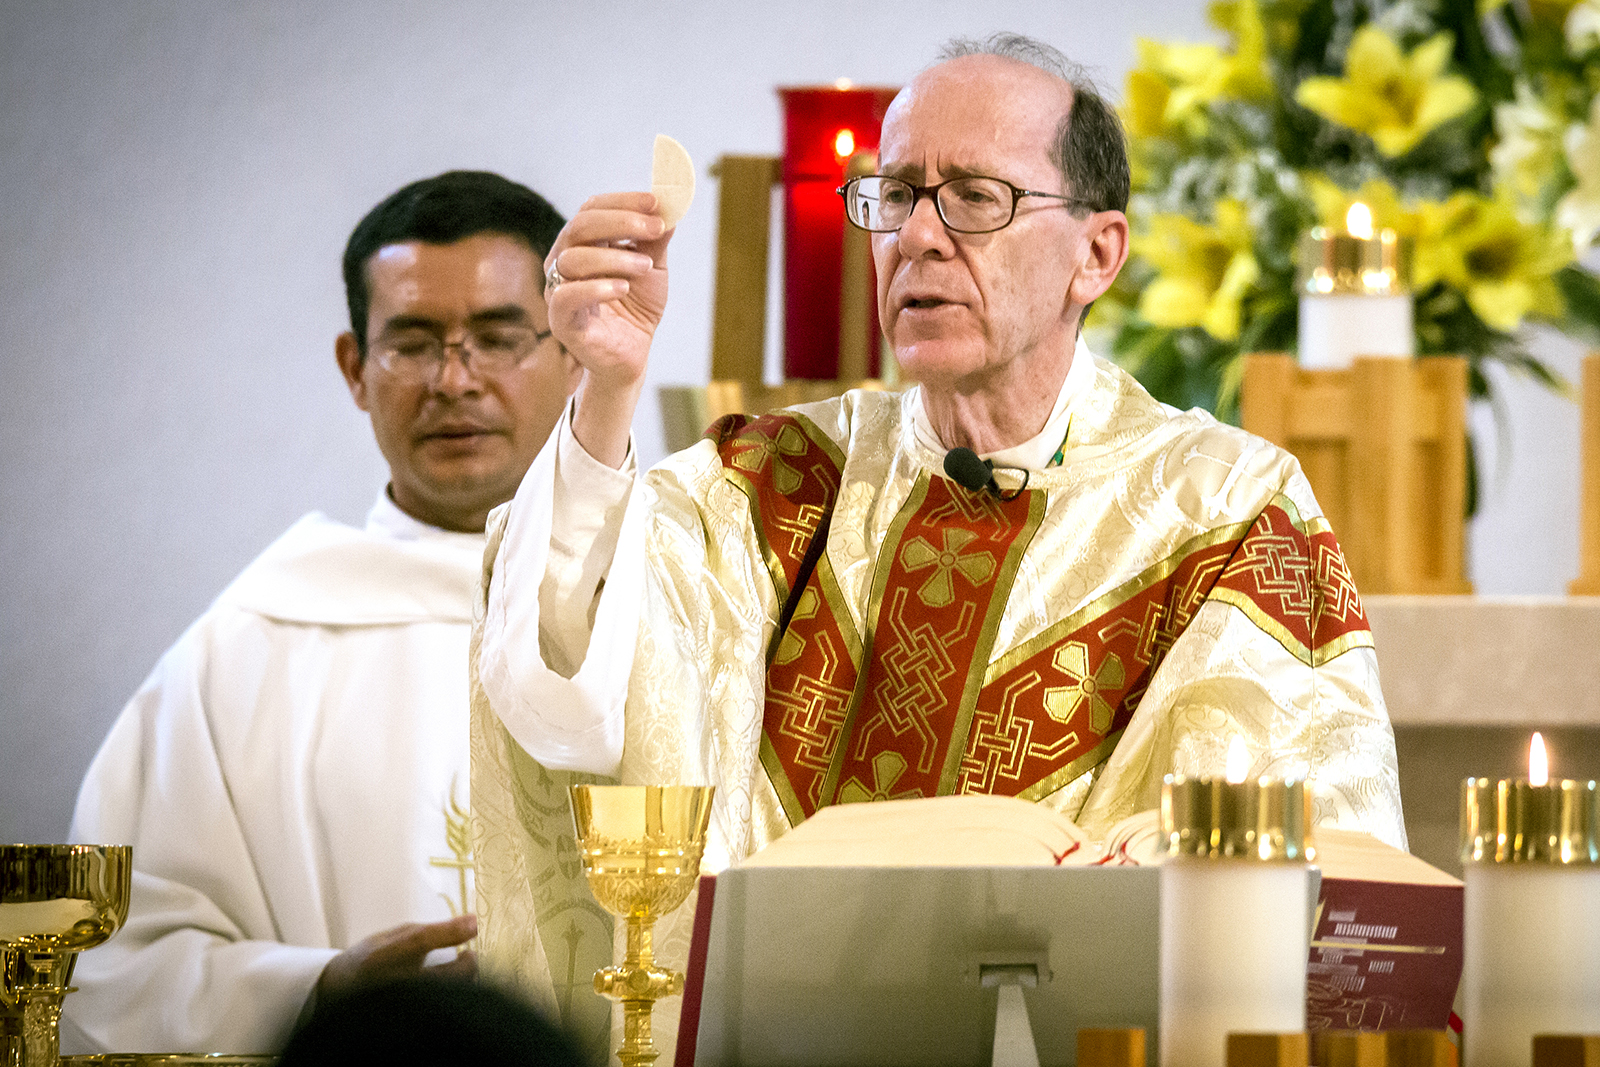 Eucharistic mission looks to strengthen faith in True Presence of ...